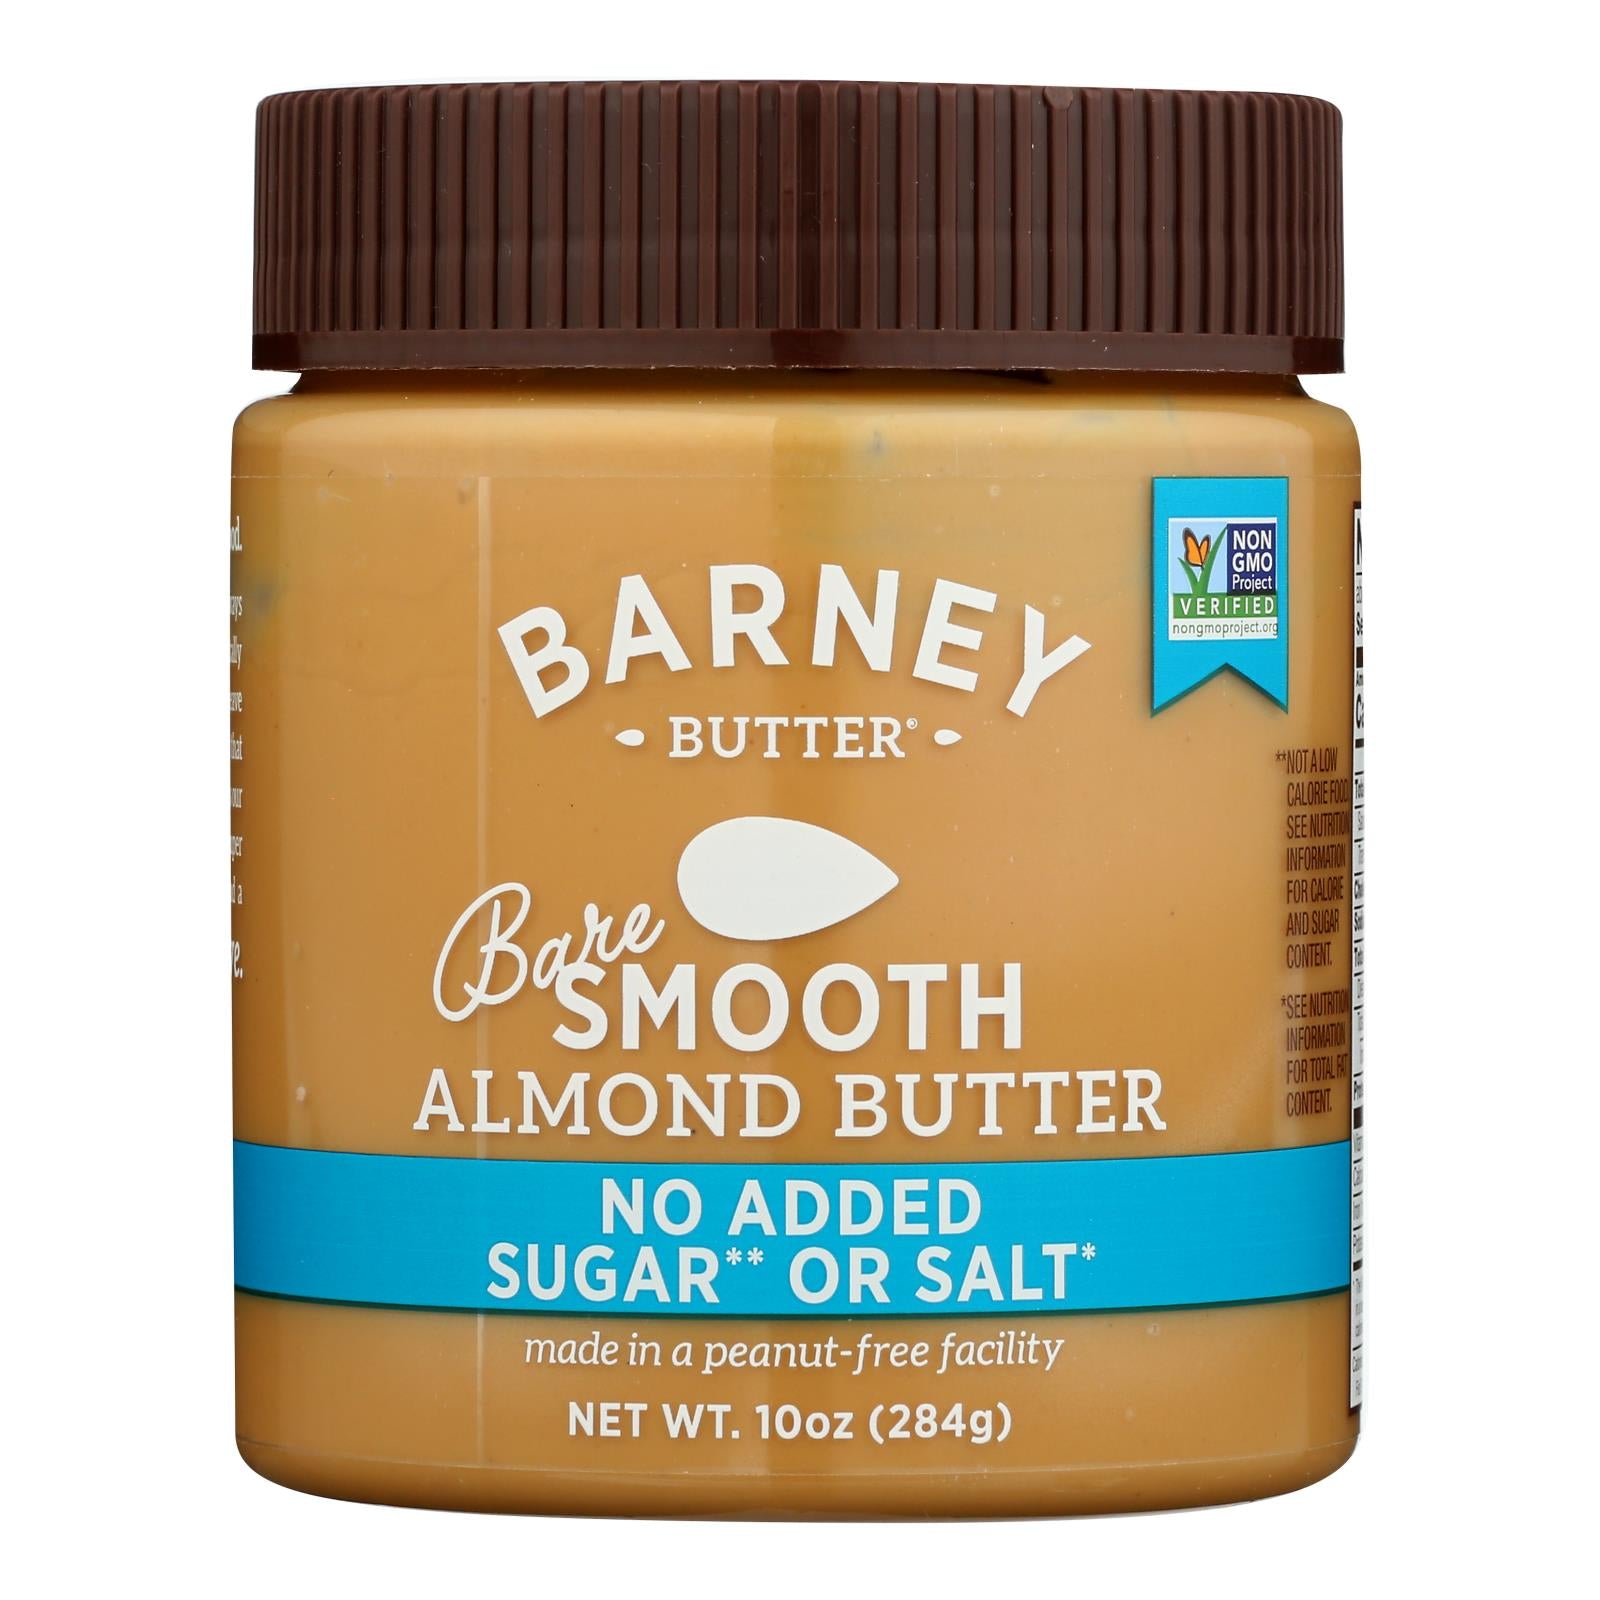 Barney Butter - Almond Butter - Bare Smooth - Case Of 6 - 10 Oz.